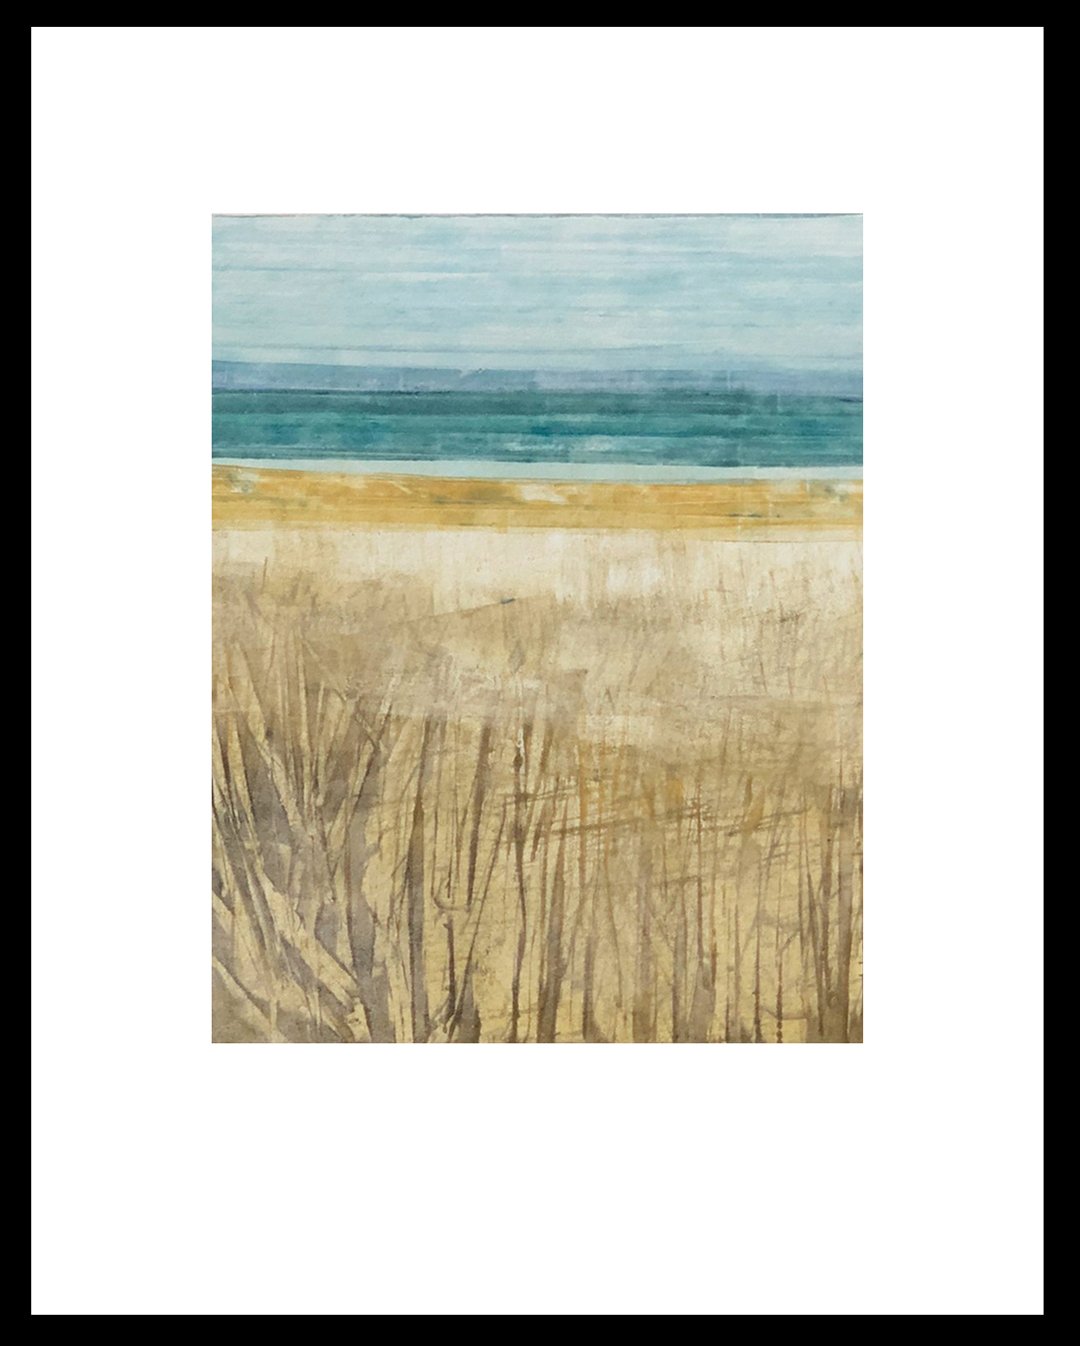    Through the Grasses    Walking through the grasses to the water. Lake or ocean? You decide.   Monotype, Mat/ frame @ 16.5 x 13.75,” 1/1   $379 - SOLD  